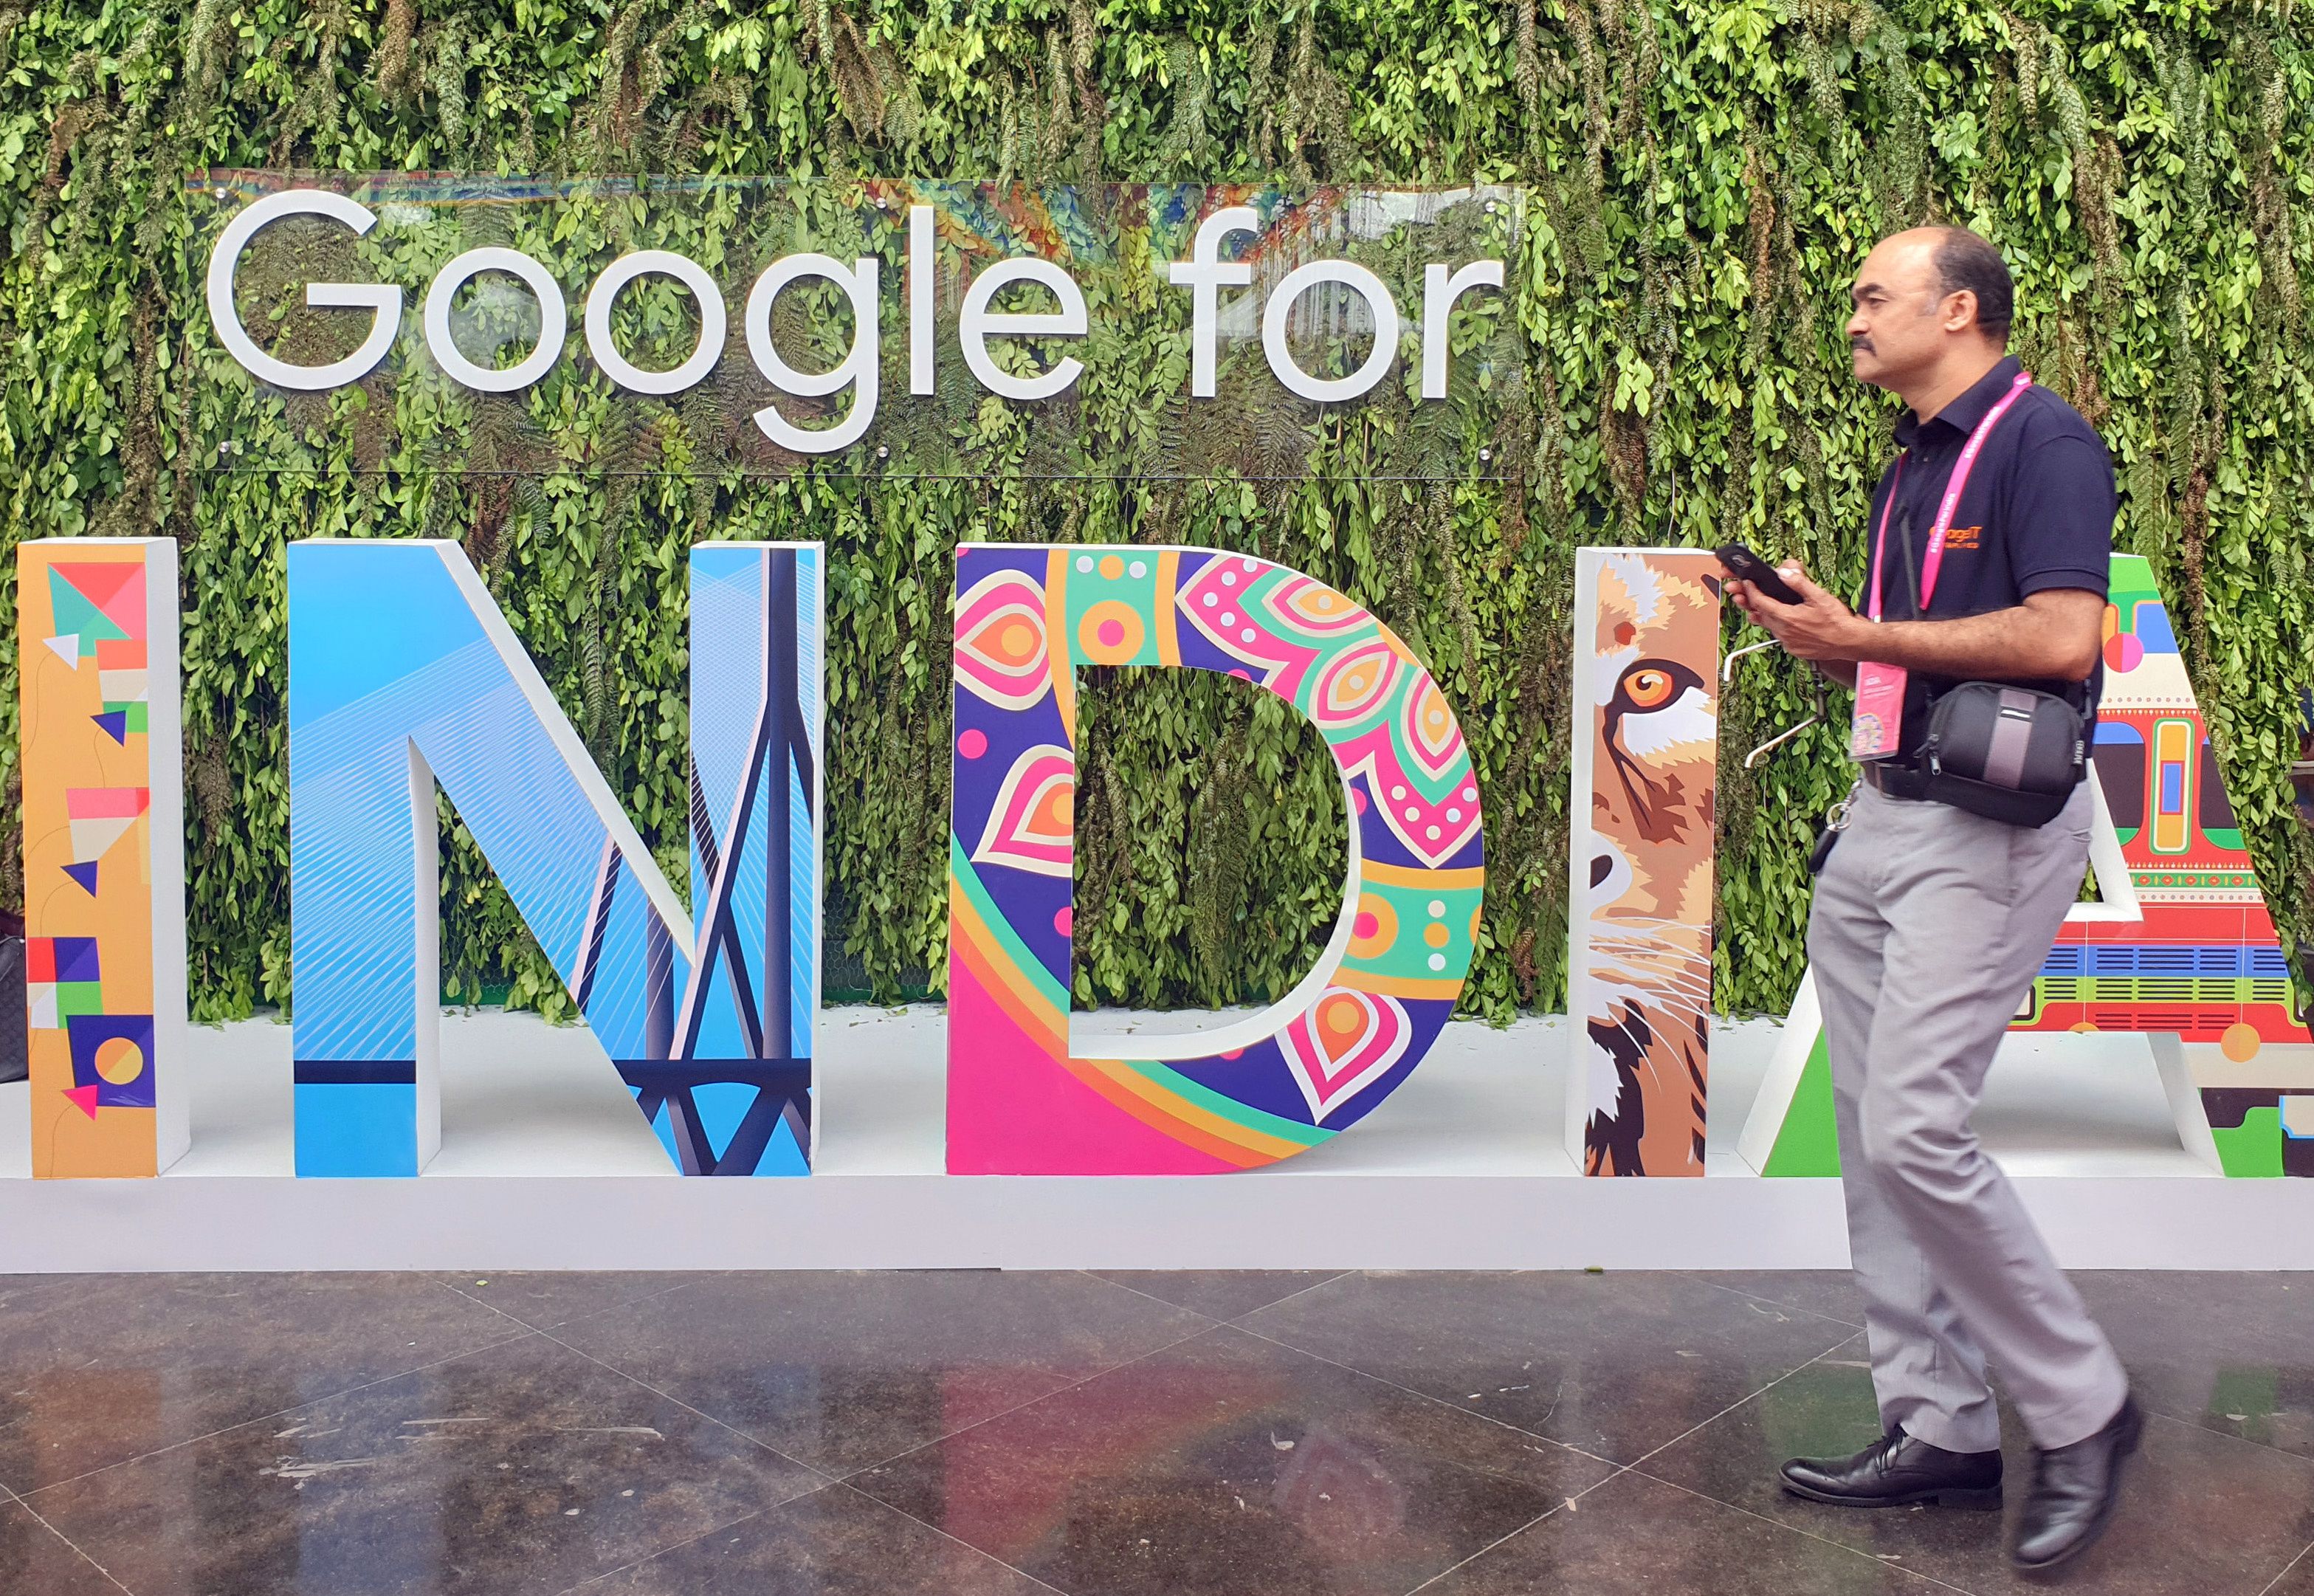 A man walks past the sign of "Google for India", the company's annual technology event in New Delhi, India